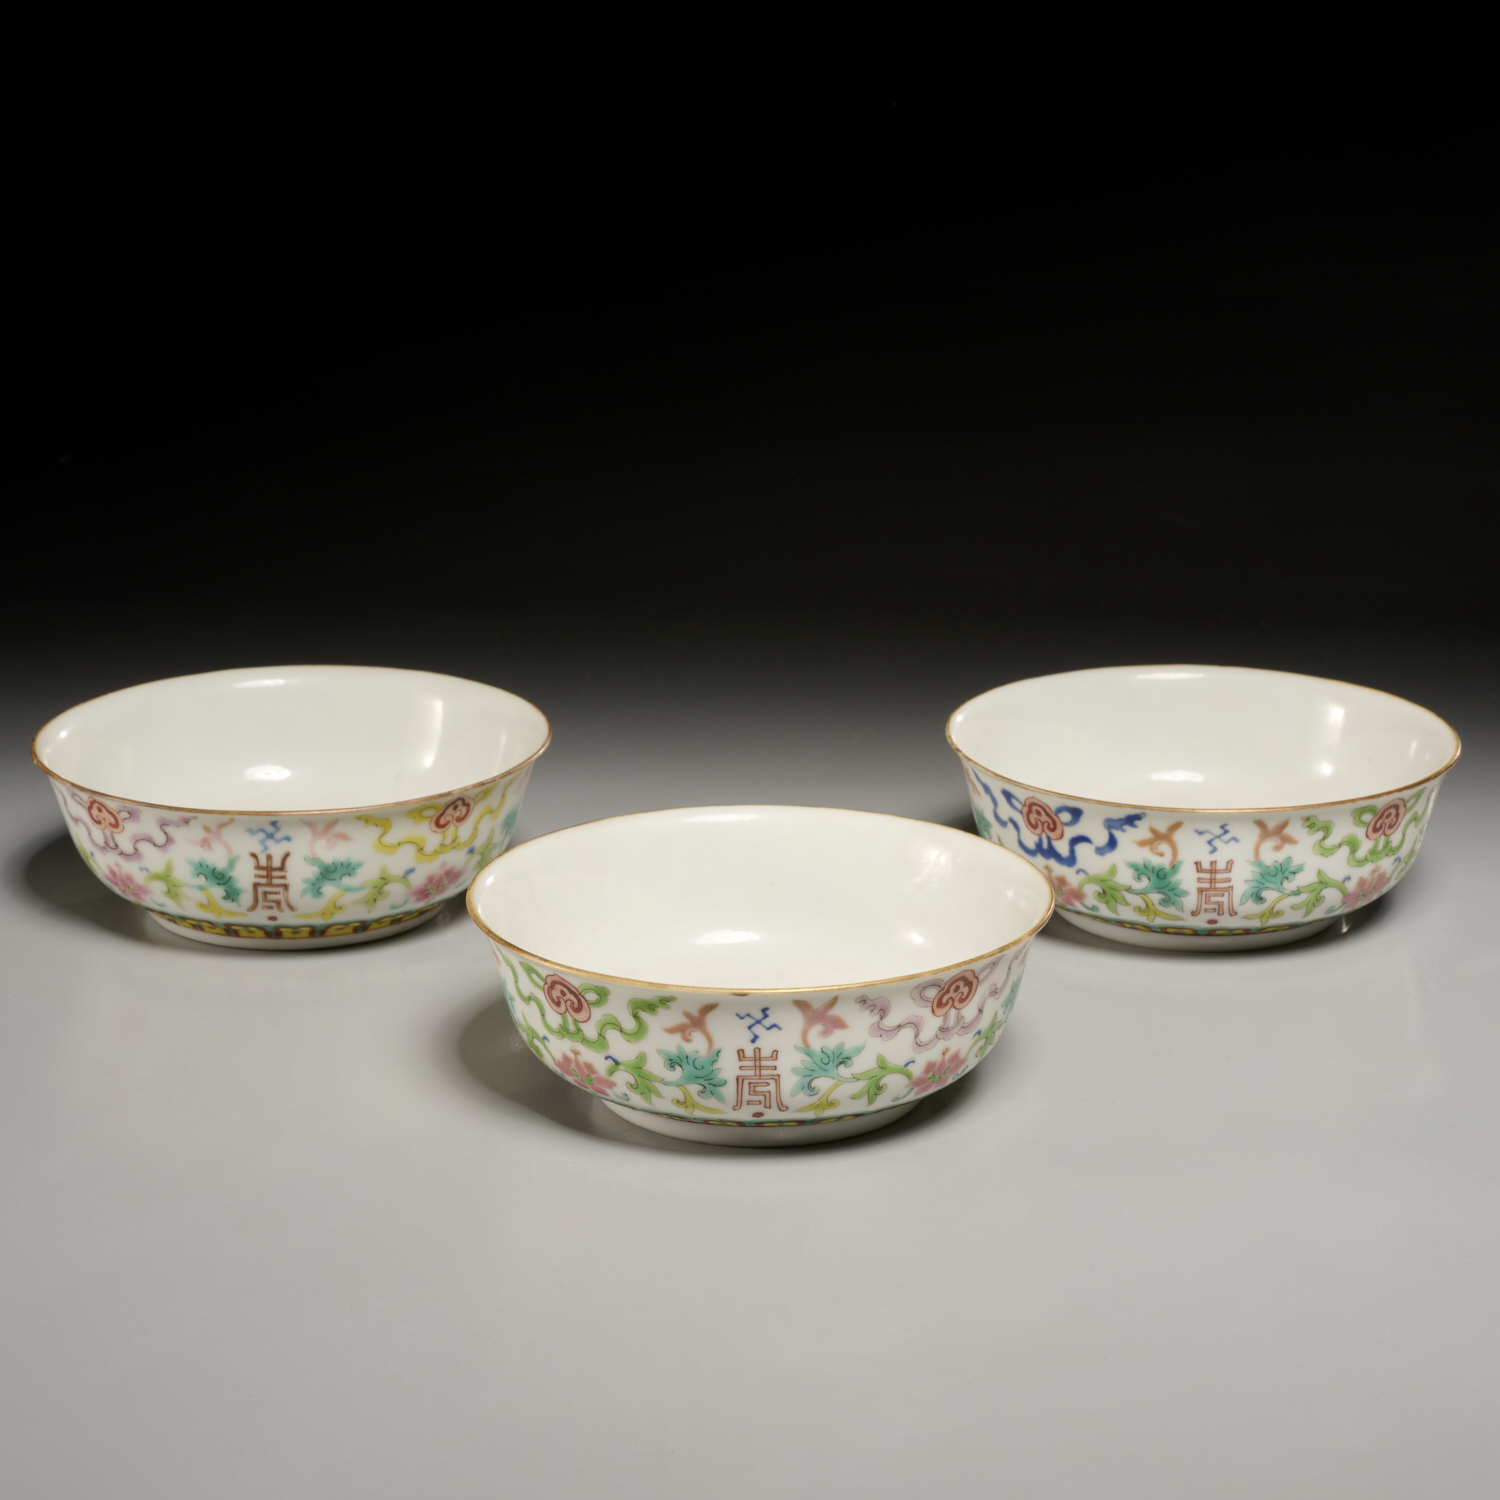  3 CHINESE FAMILLE ROSE PORCELAIN 360291